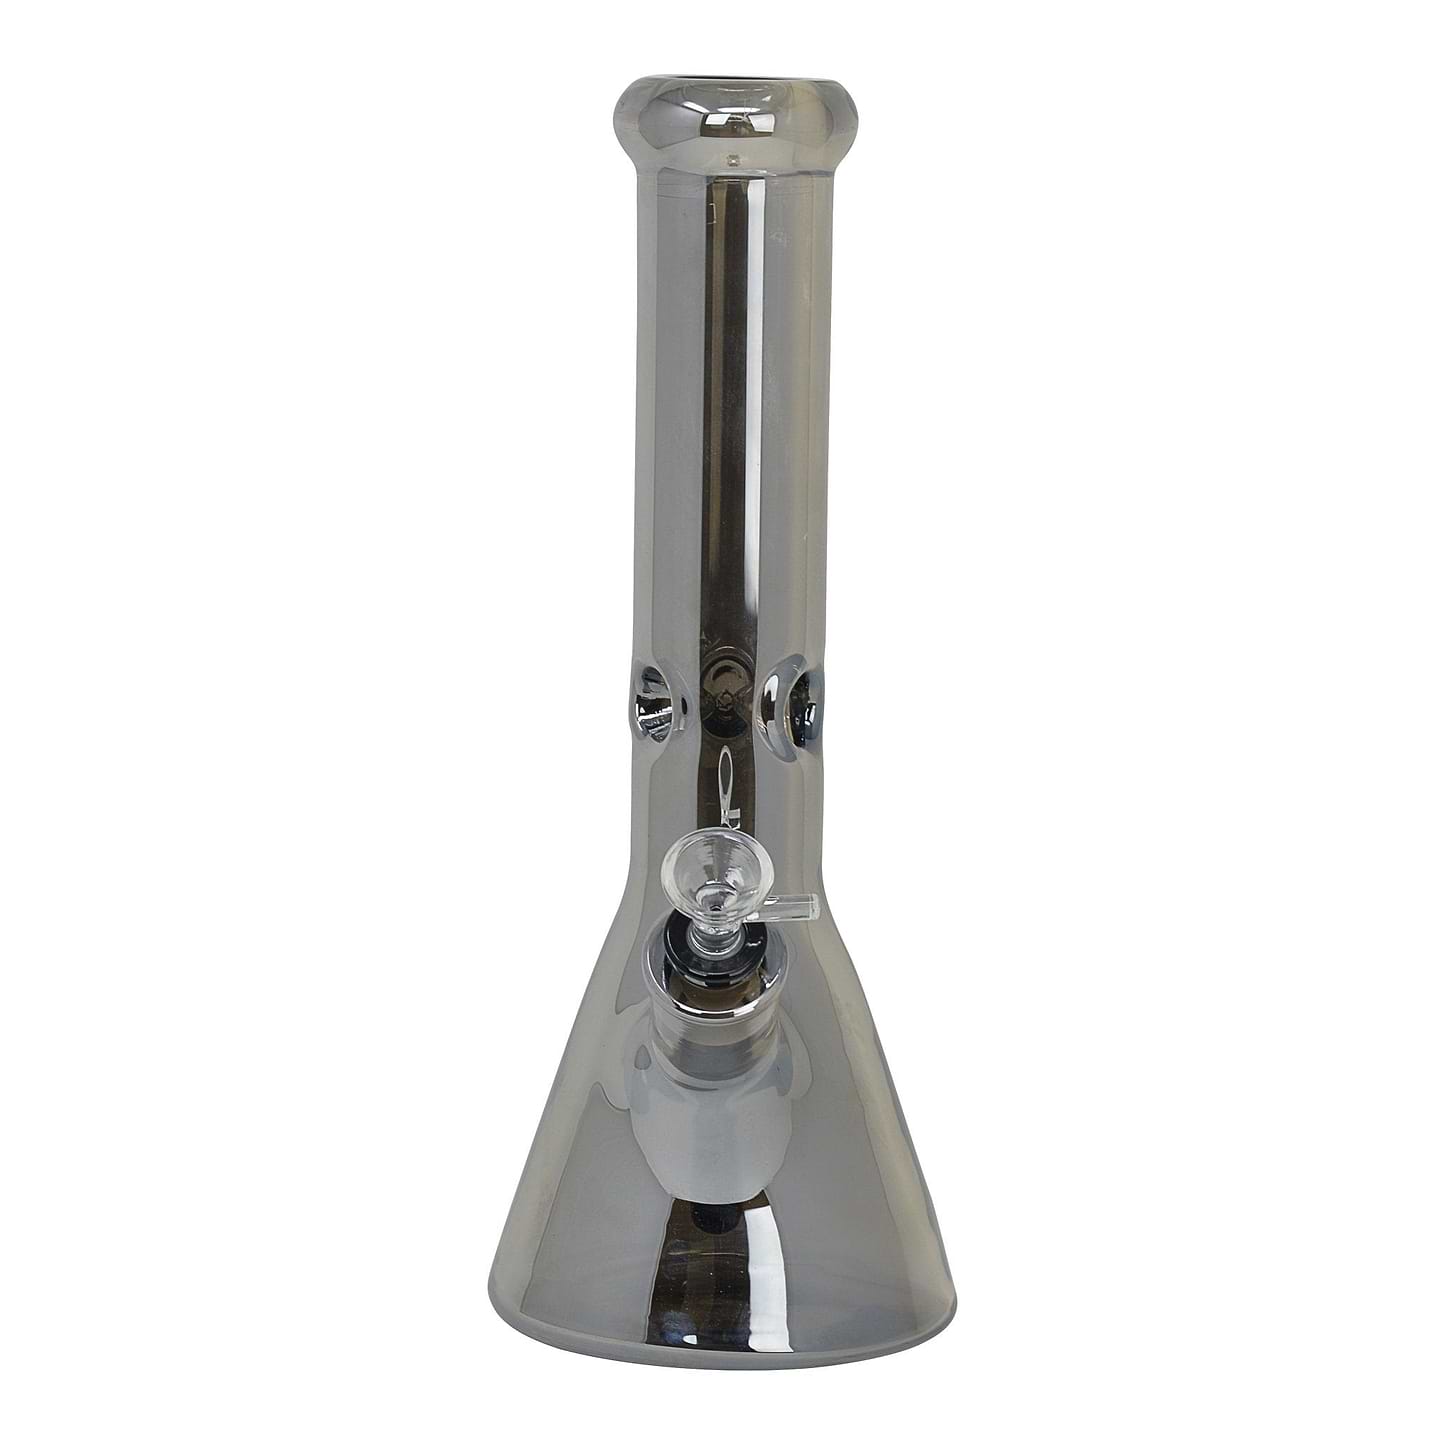 13-inch glass bong beaker style smoking device semi transparent chrome color with ice catcher